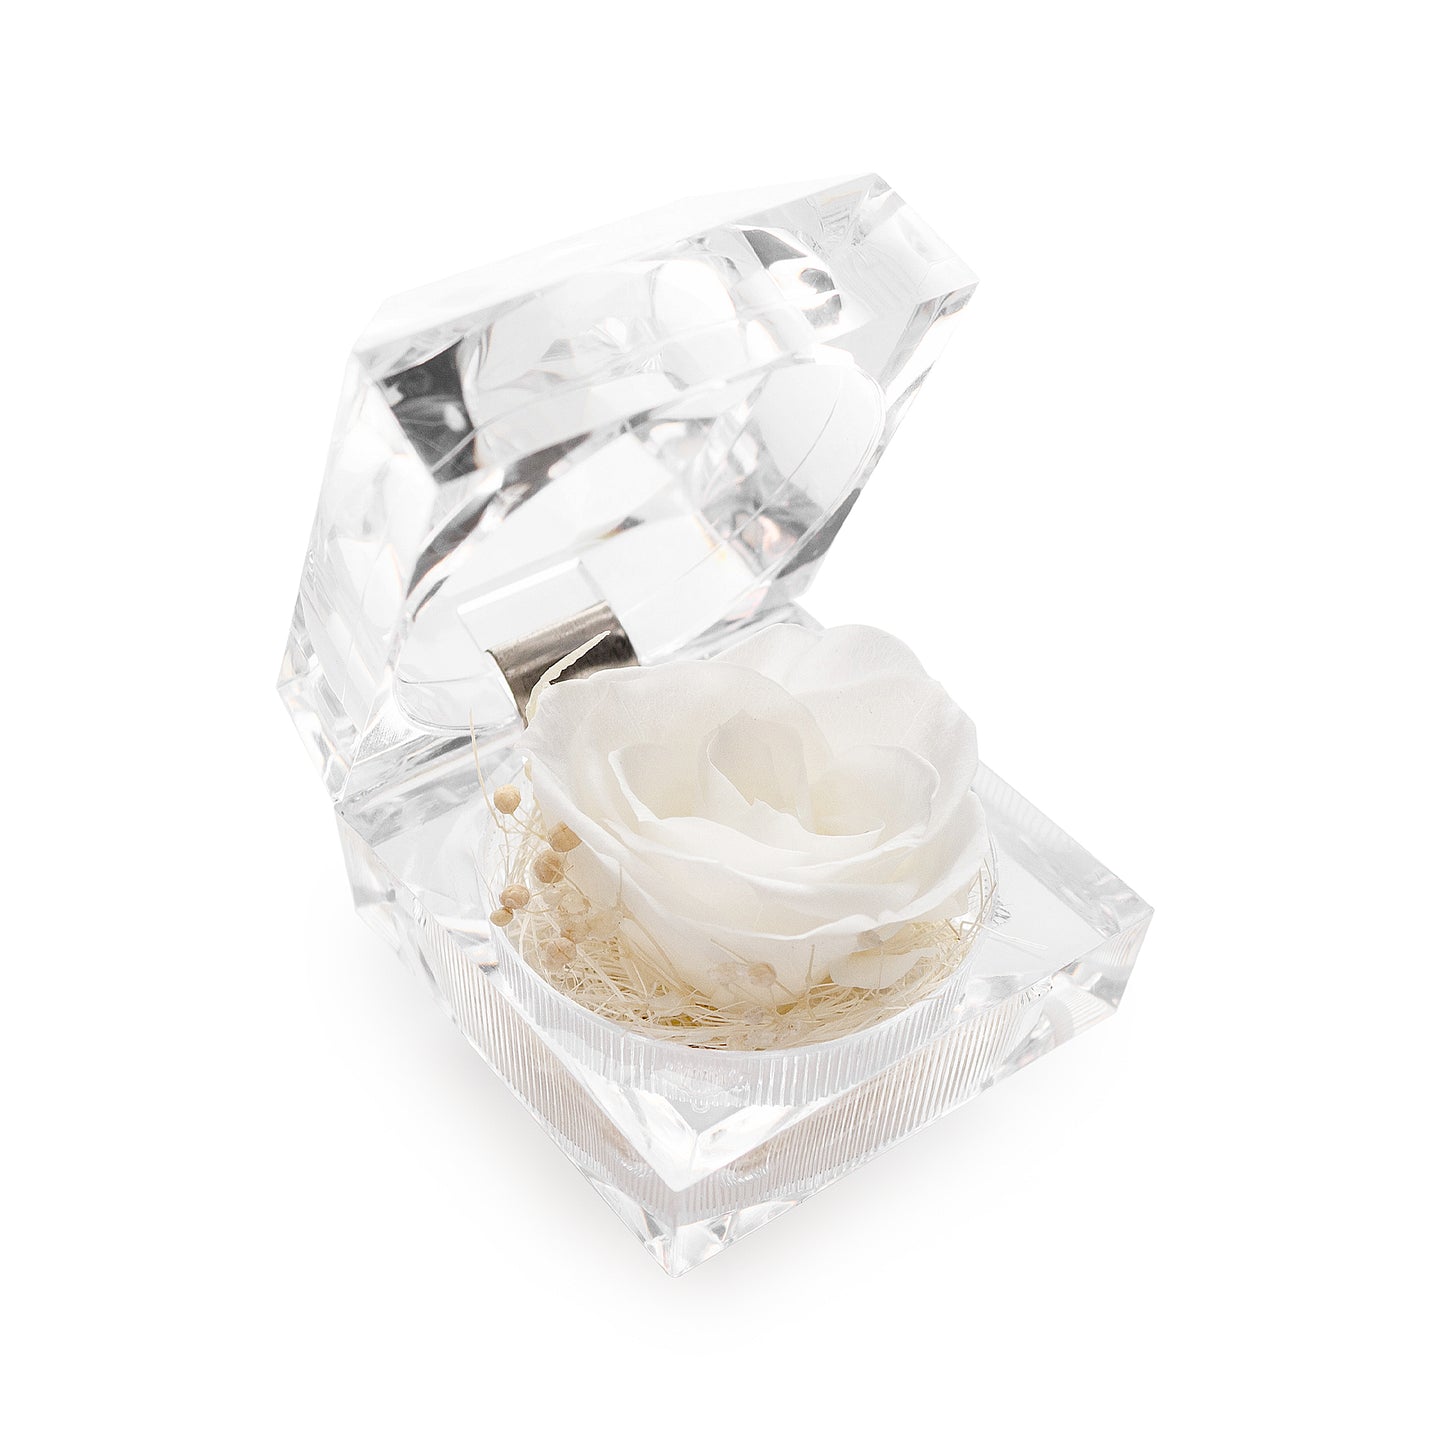 Preserved White Rose Crystal-Look Ring Box